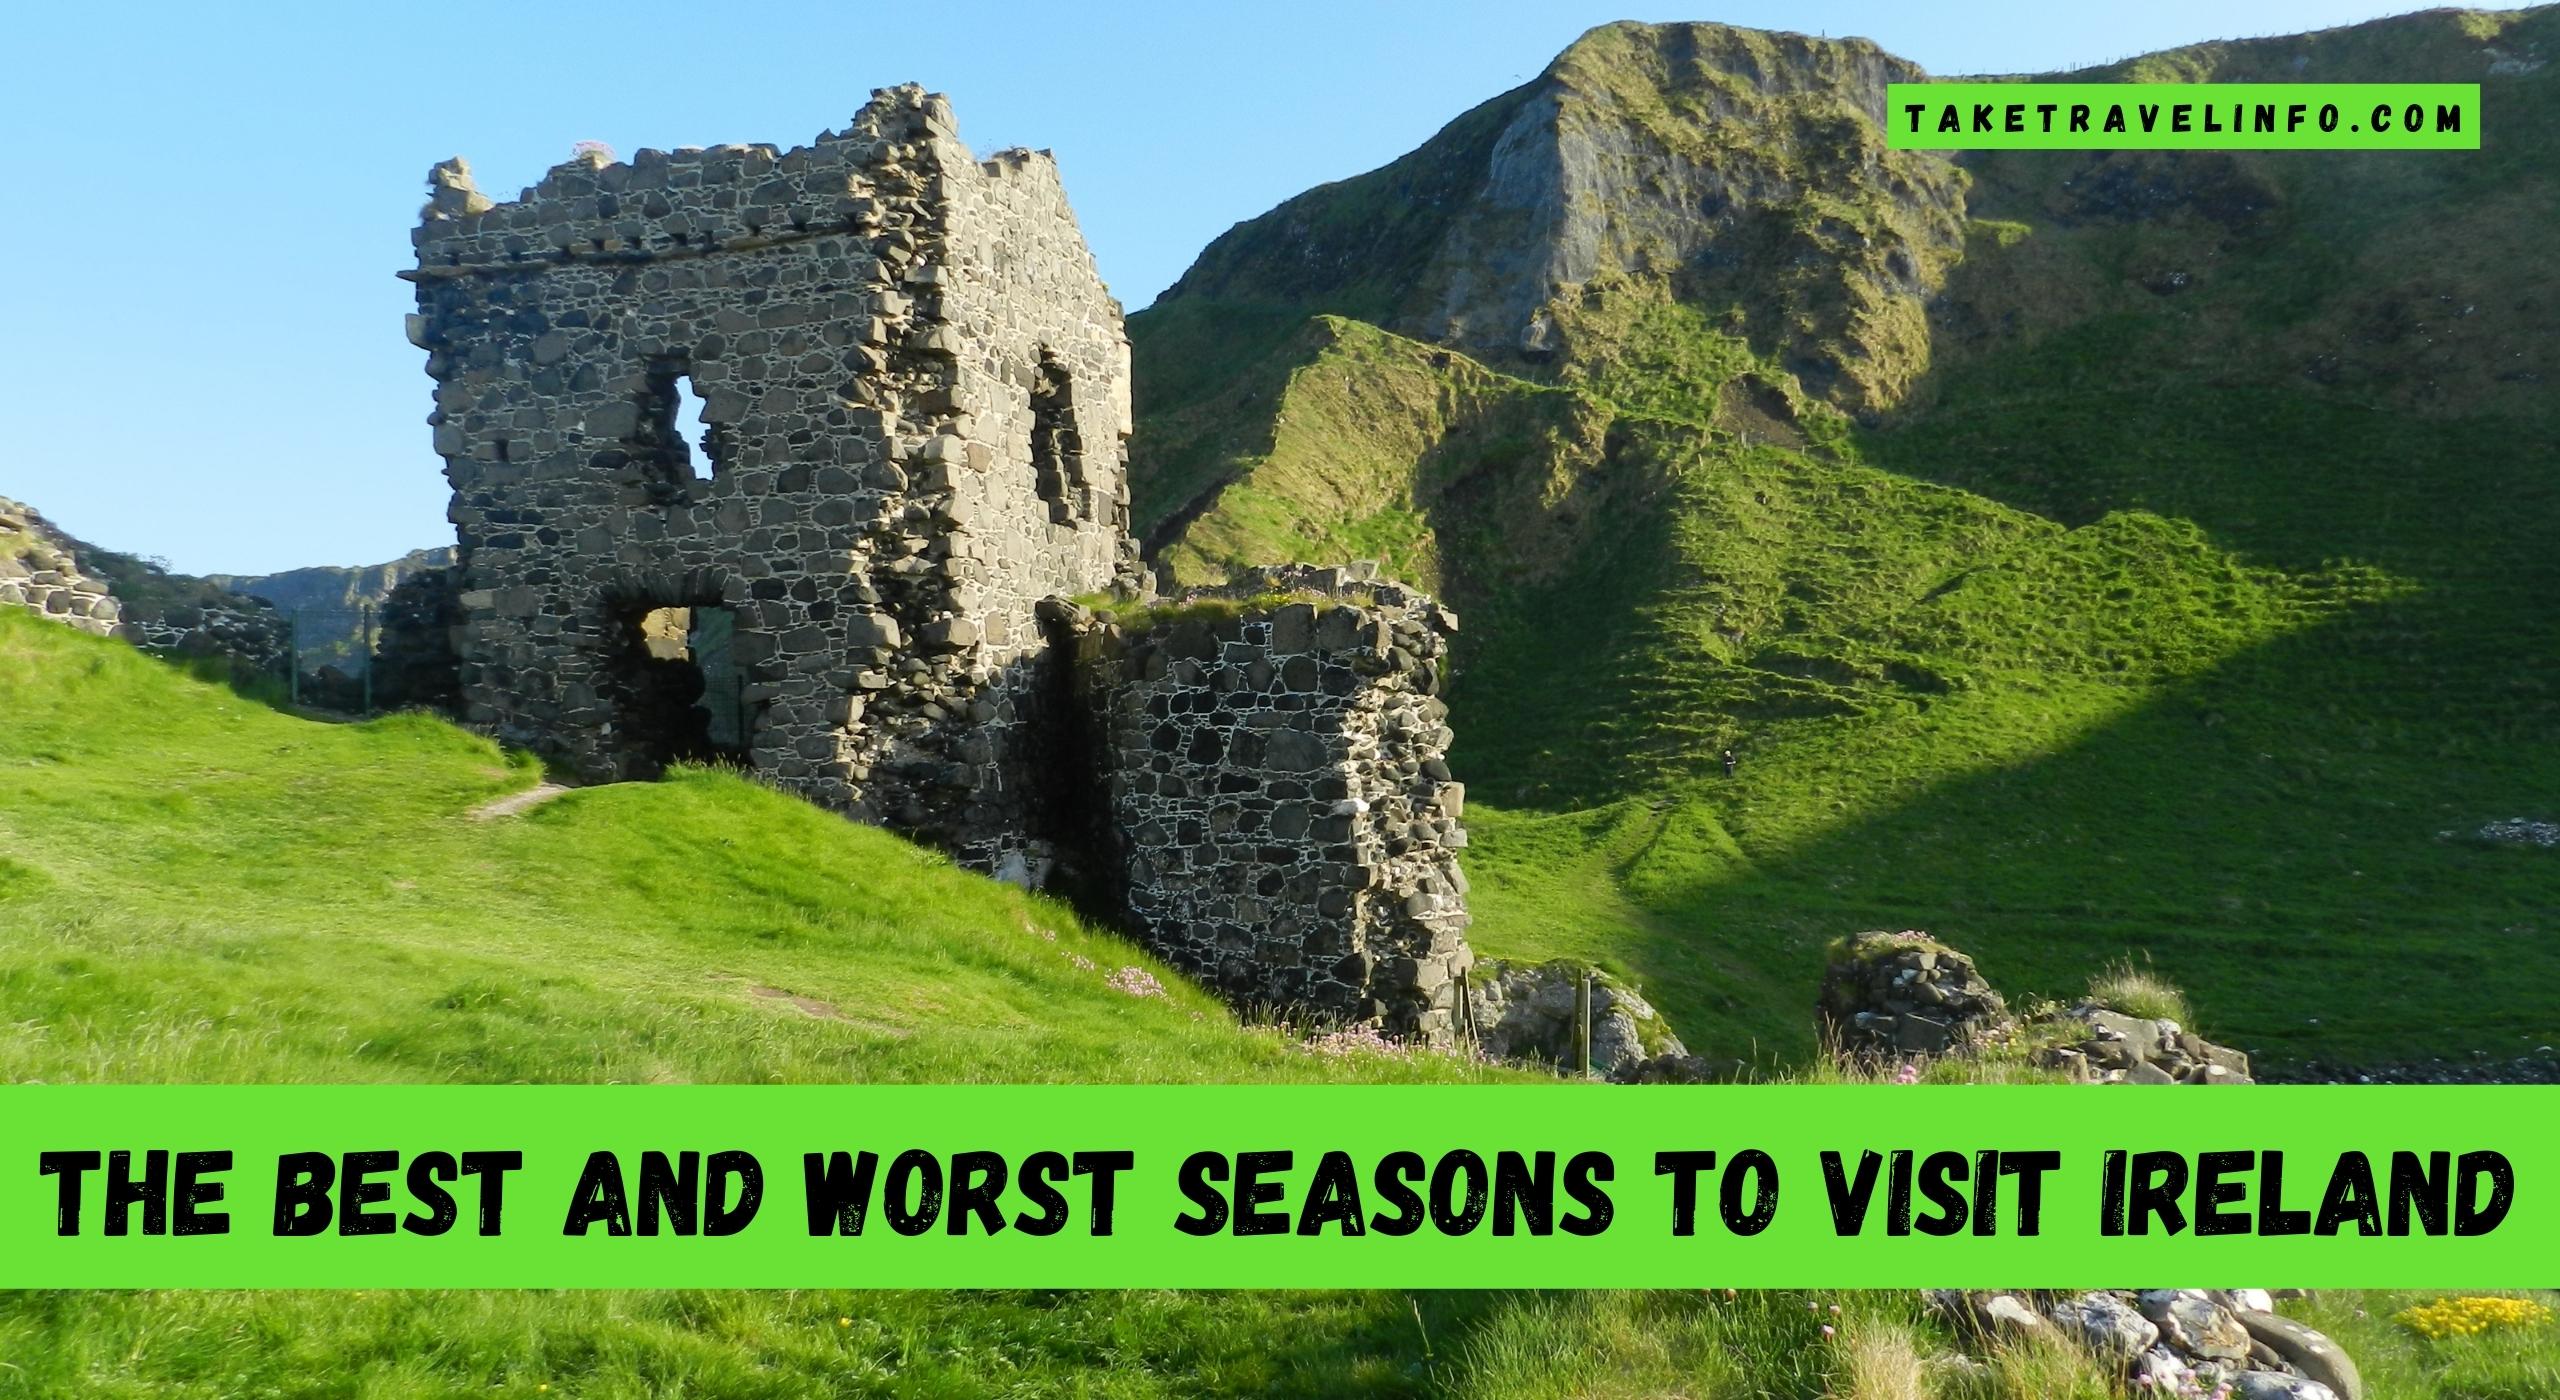 The Best and Worst Seasons to Visit Ireland